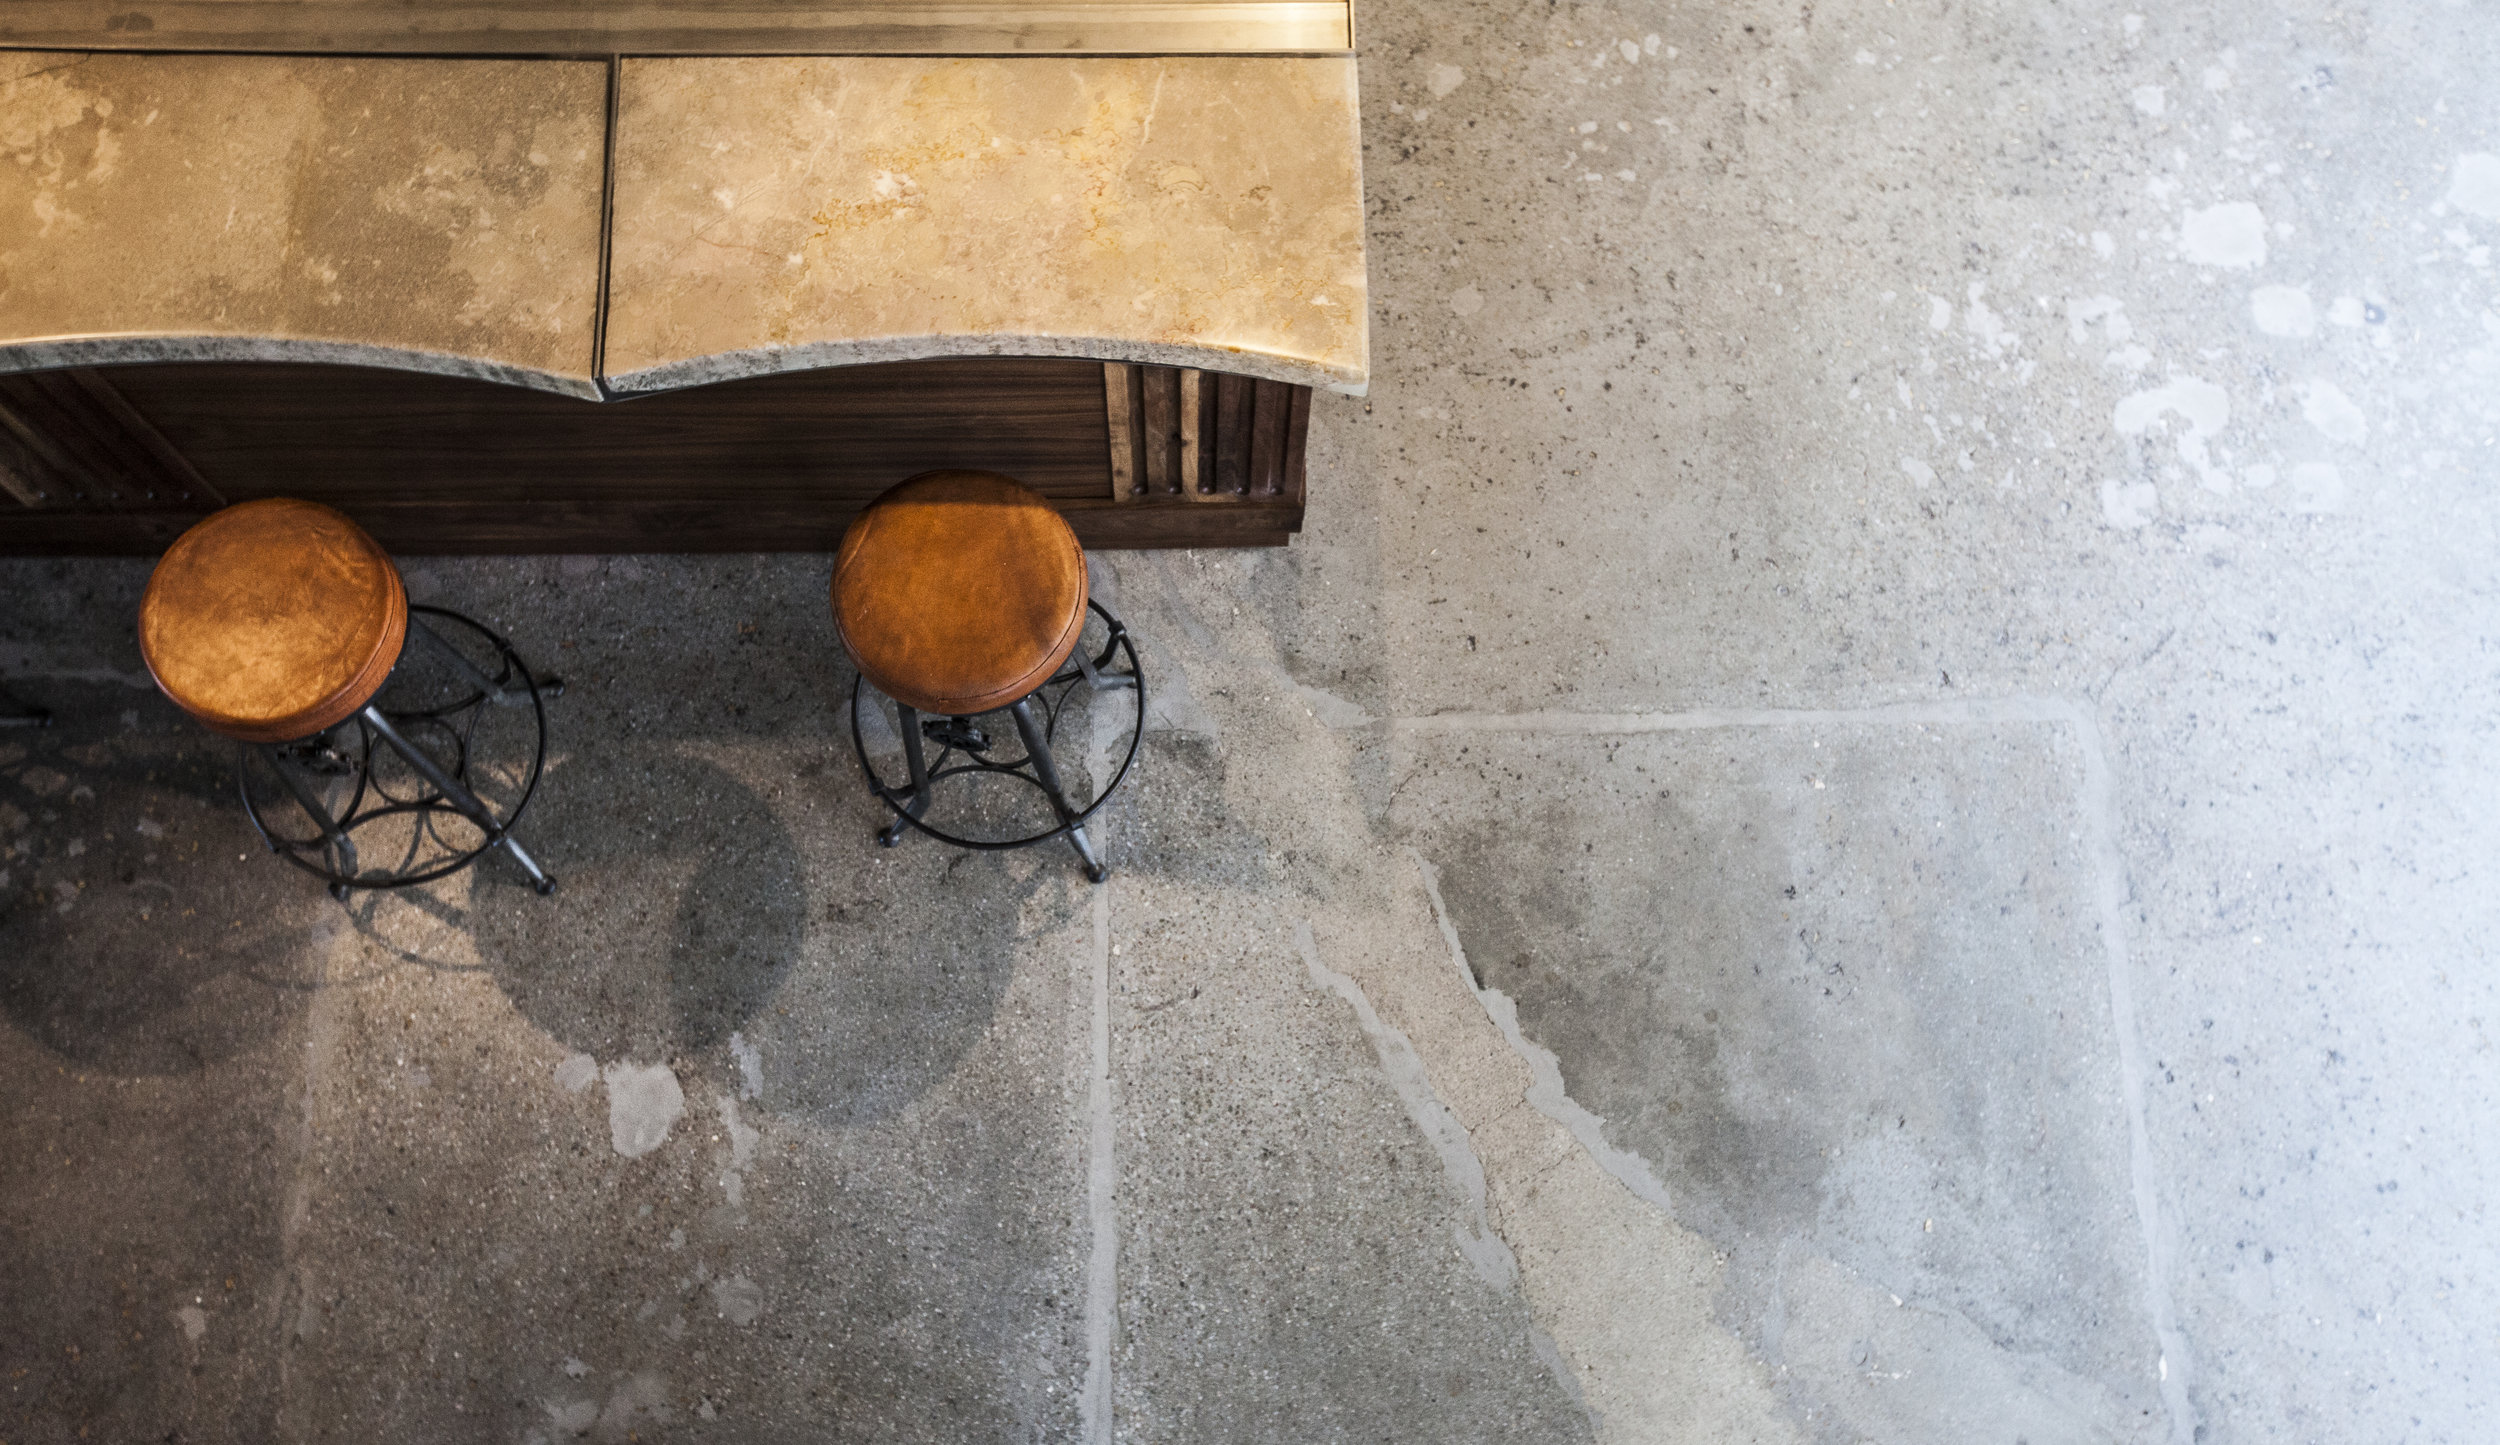  Complementing the floor original concrete floors that celebrate the space's history, a limestone bar top encased in resin.&nbsp;Bringing out the beautiful raw details of the stone,&nbsp;tt also provides a durable surface for the bar and cafe patrons